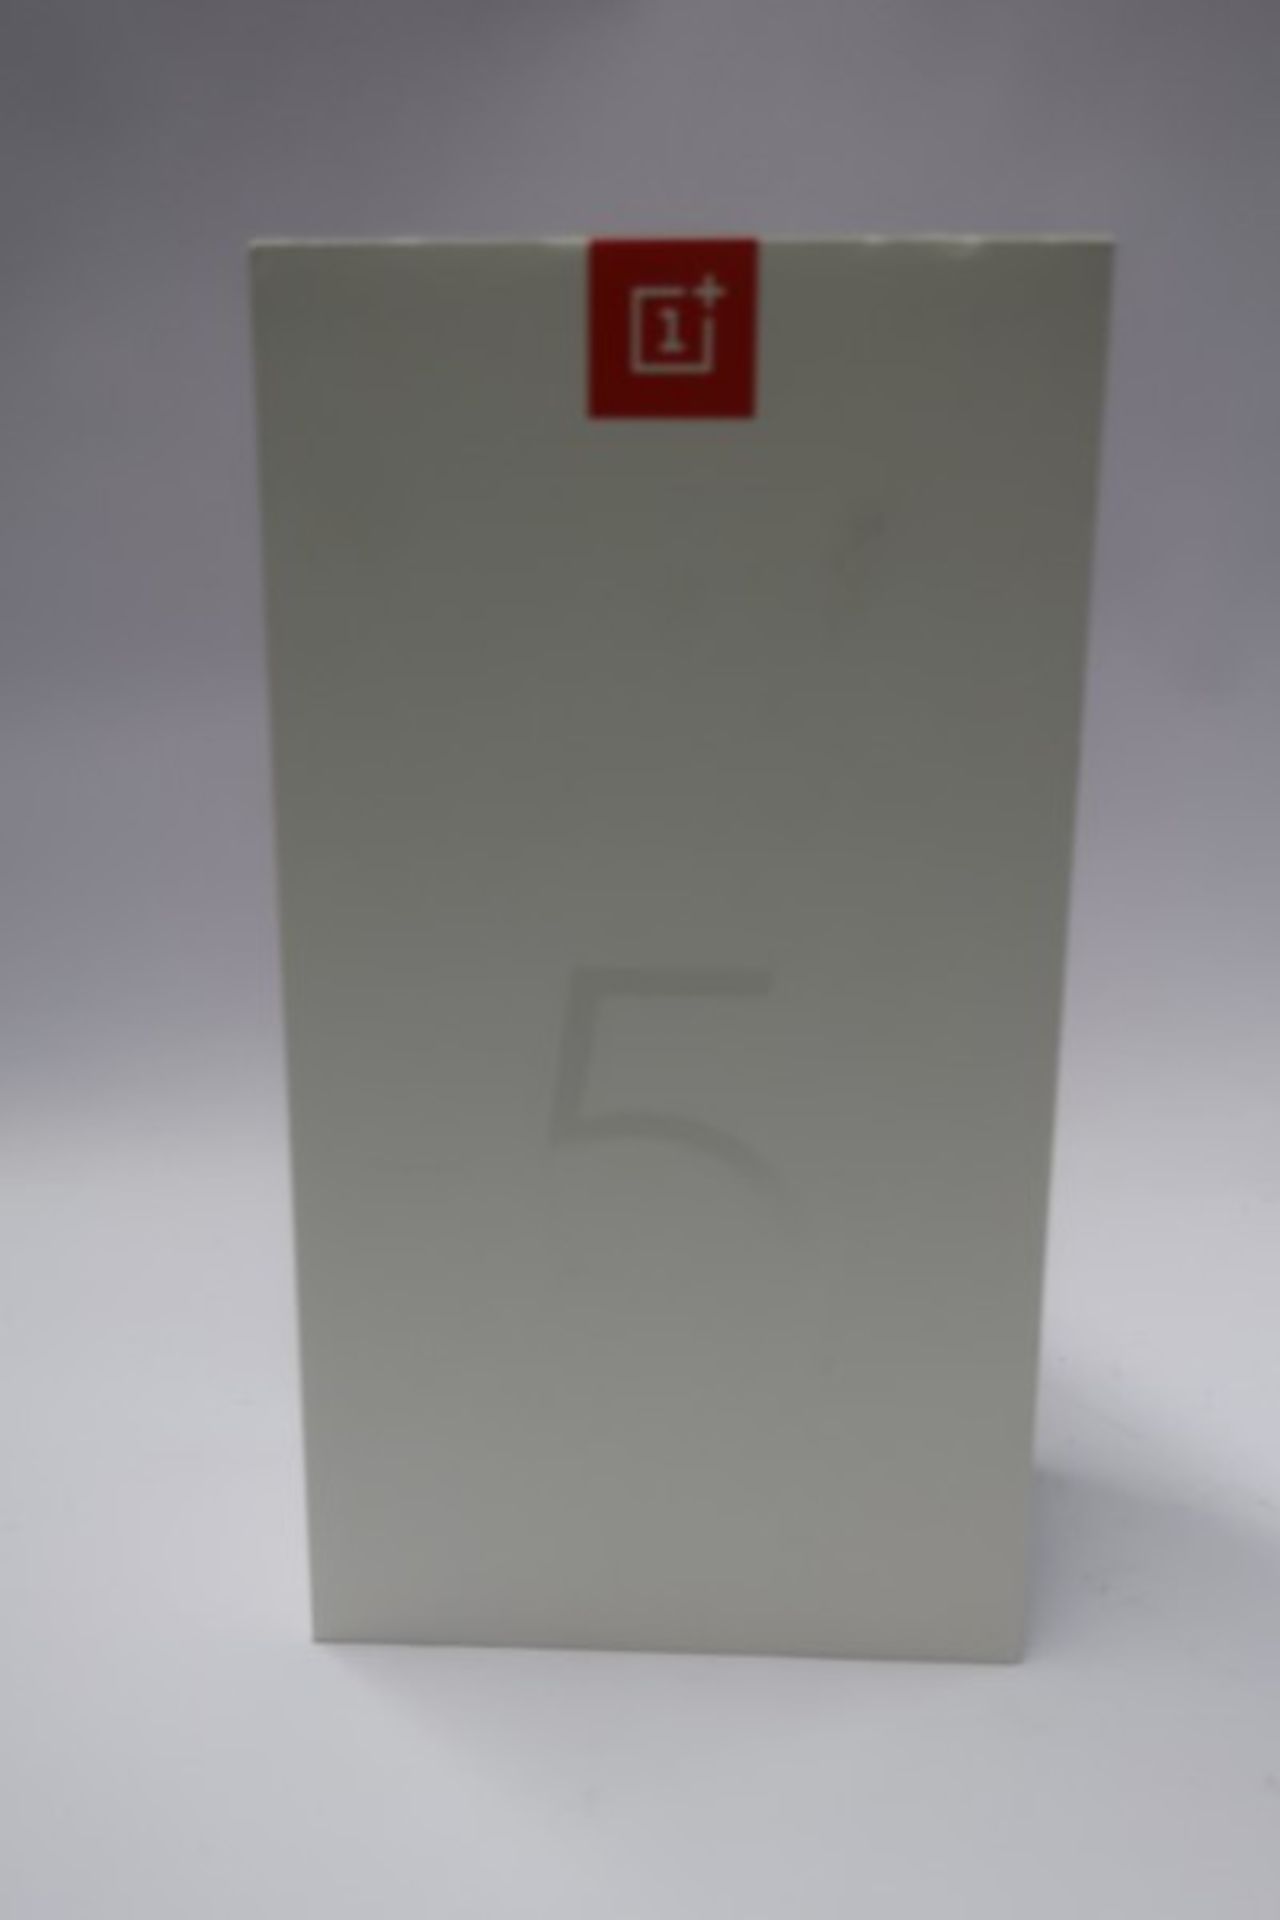 A boxed as new OnePlus 5T A5010 64GB dual sim smartphone (IMEI: 868717038815650 / 868717038815643).